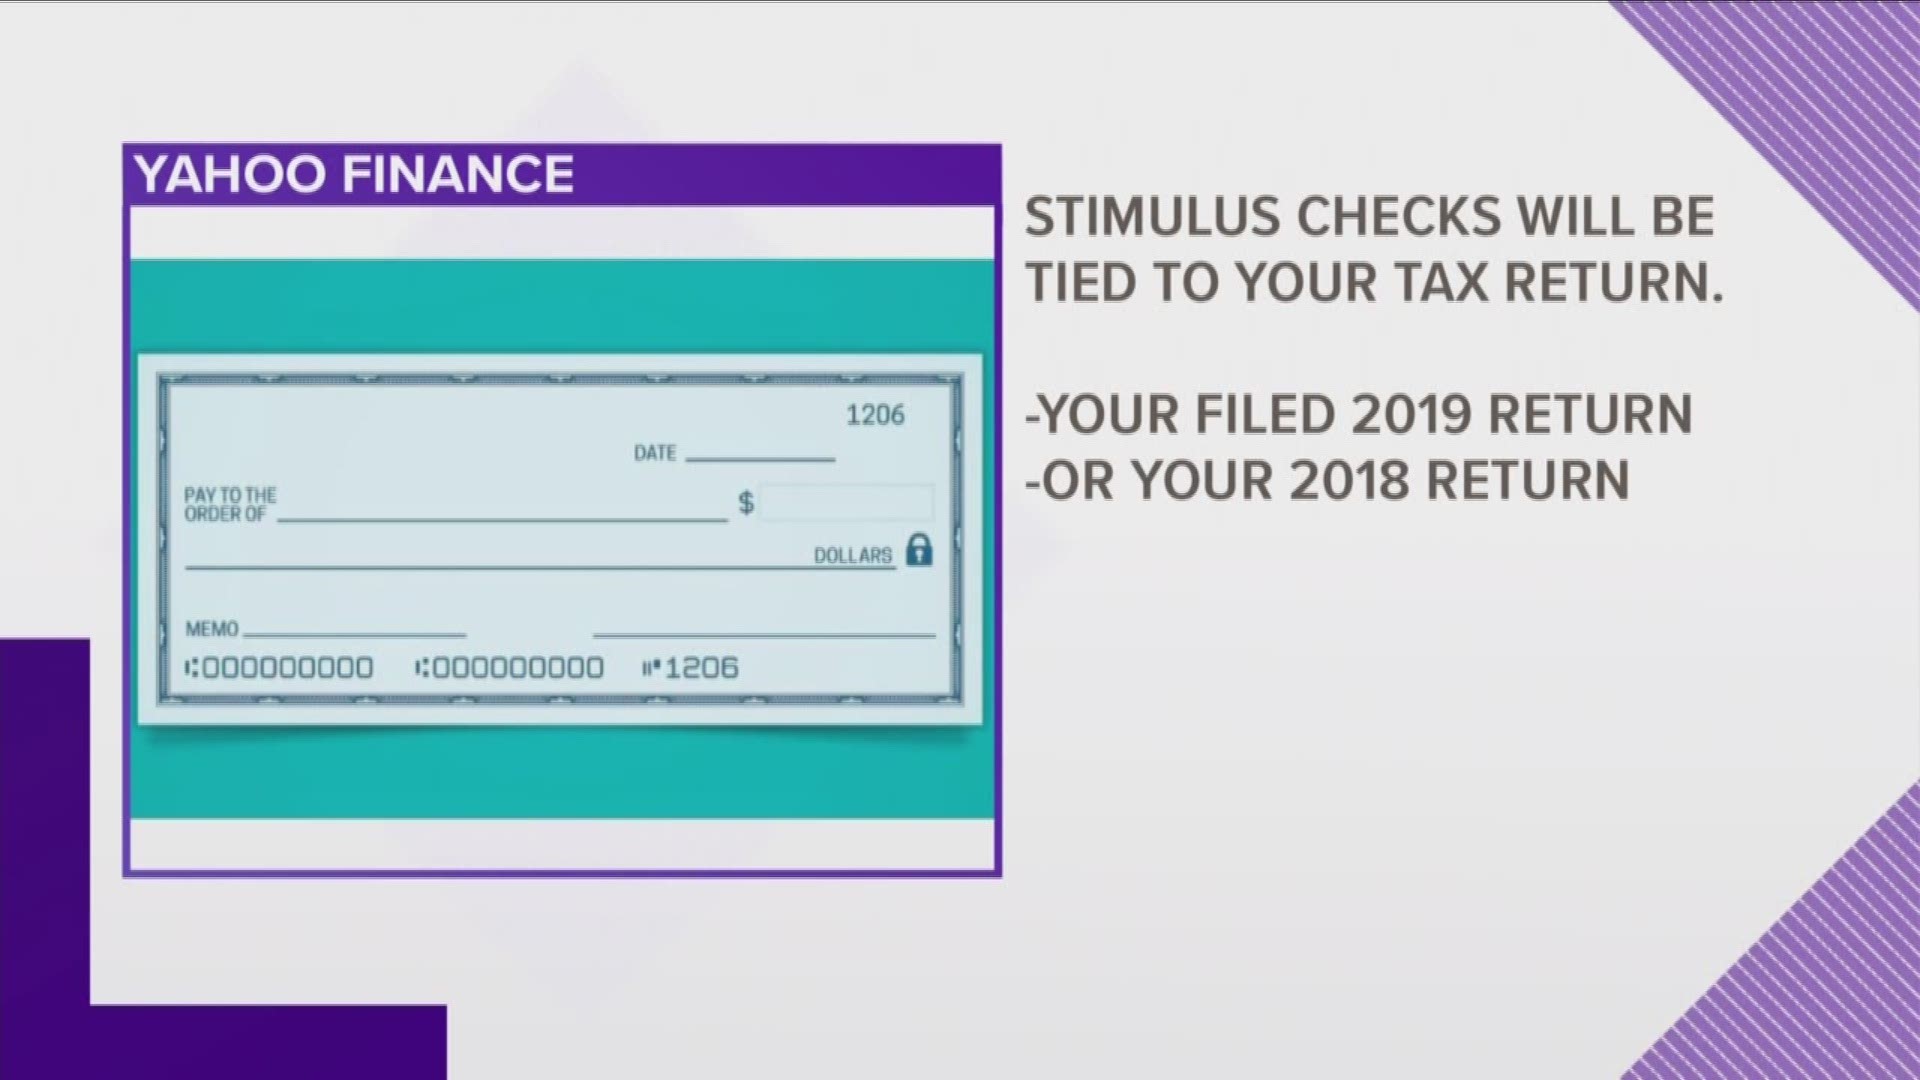 A viral post claims you need to be counted in the census to potentially get a coronavirus stimulus check. Let's get to the truth.